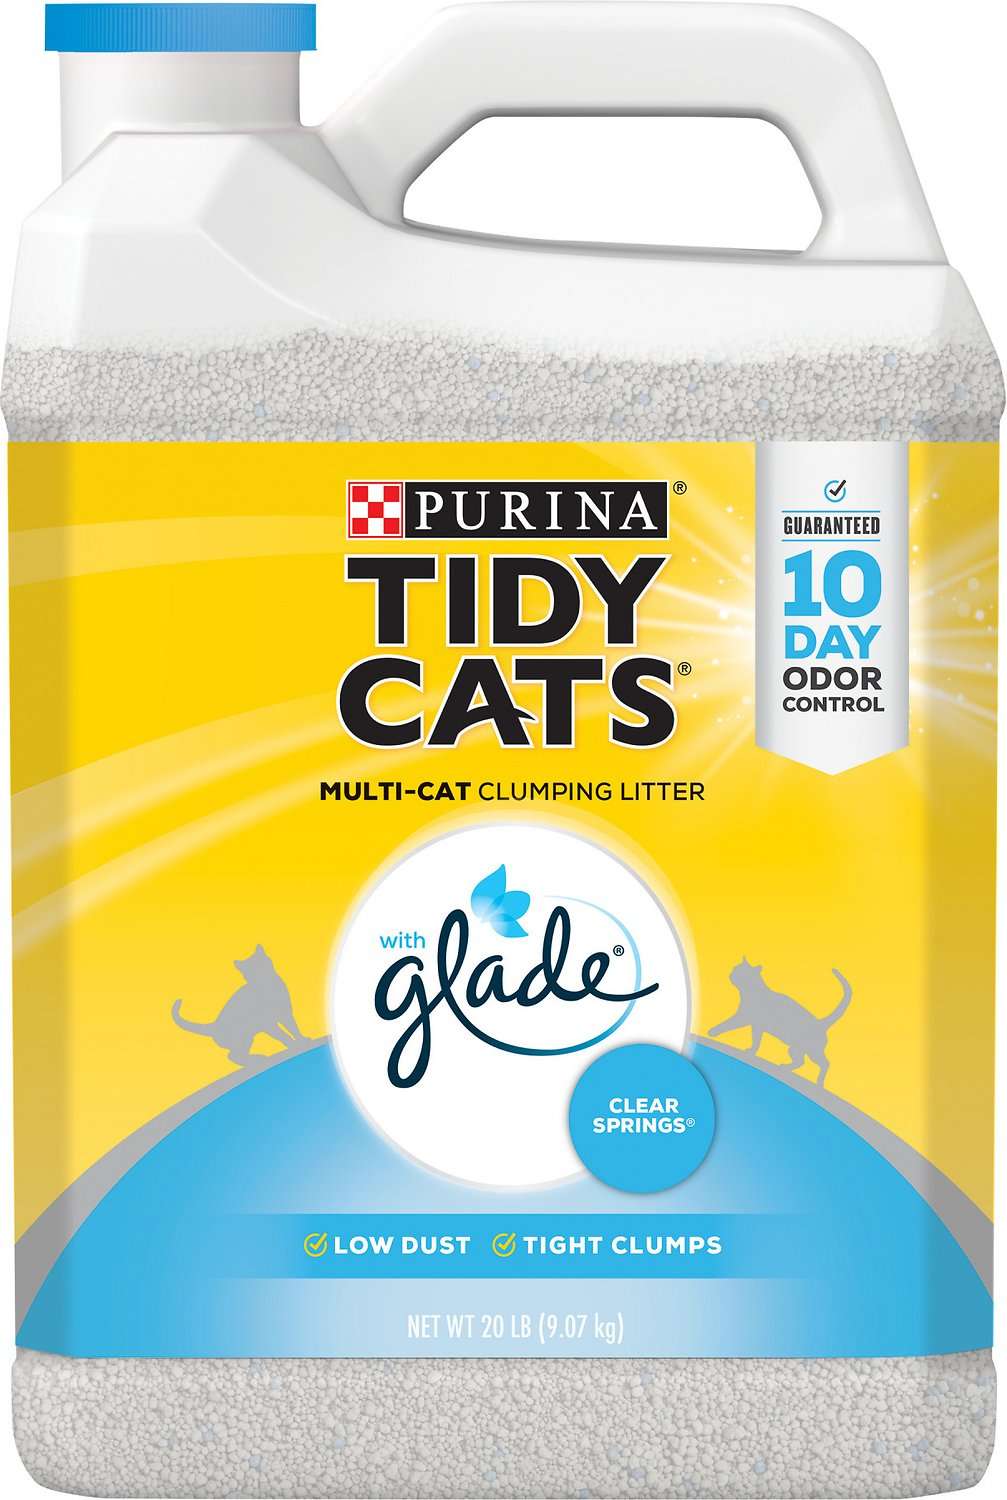 Tidy Cats Scoop Glade Tough Odor Solutions Cat Litter, 20